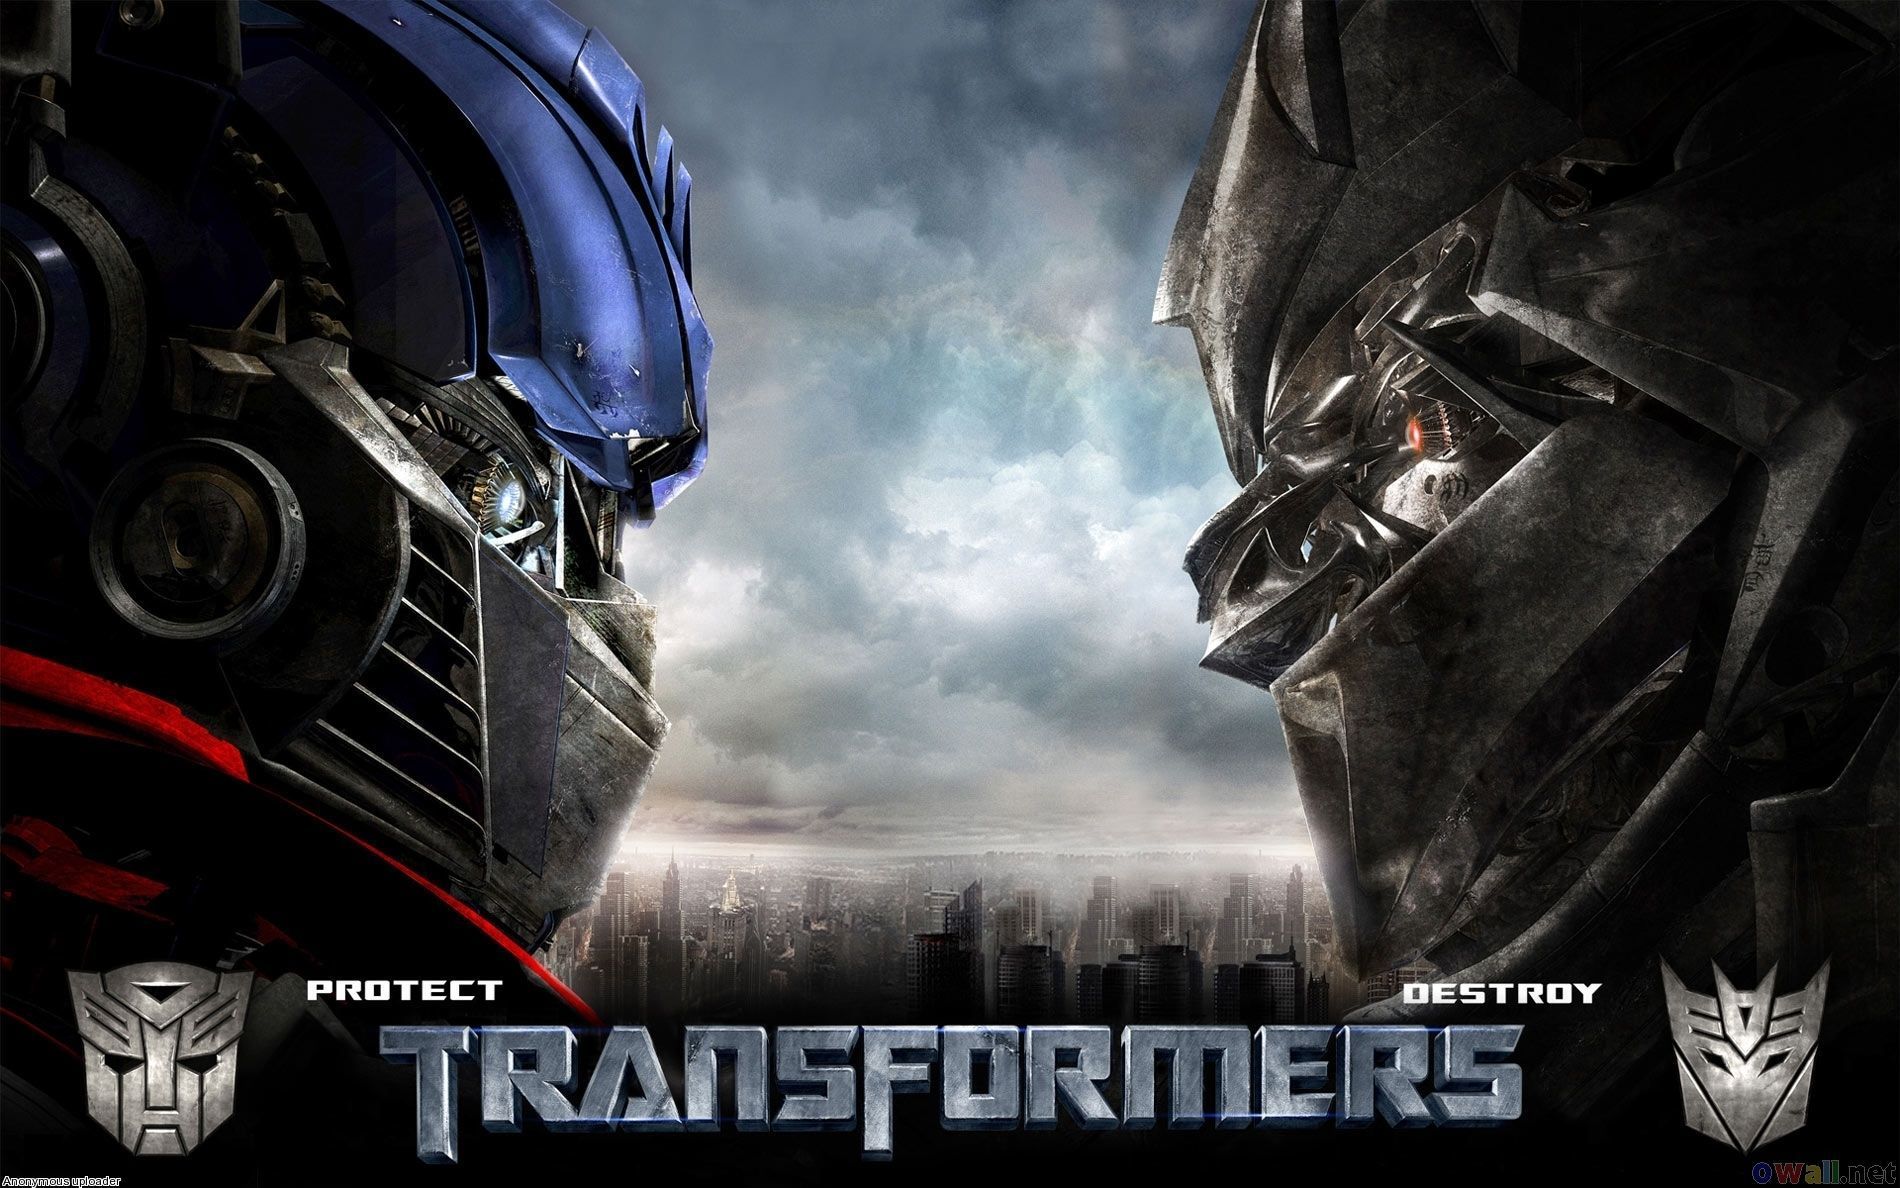 Decepticons Vs Autobots Wallpaper For Android. Transformers movie, Transformers, Movie wallpaper